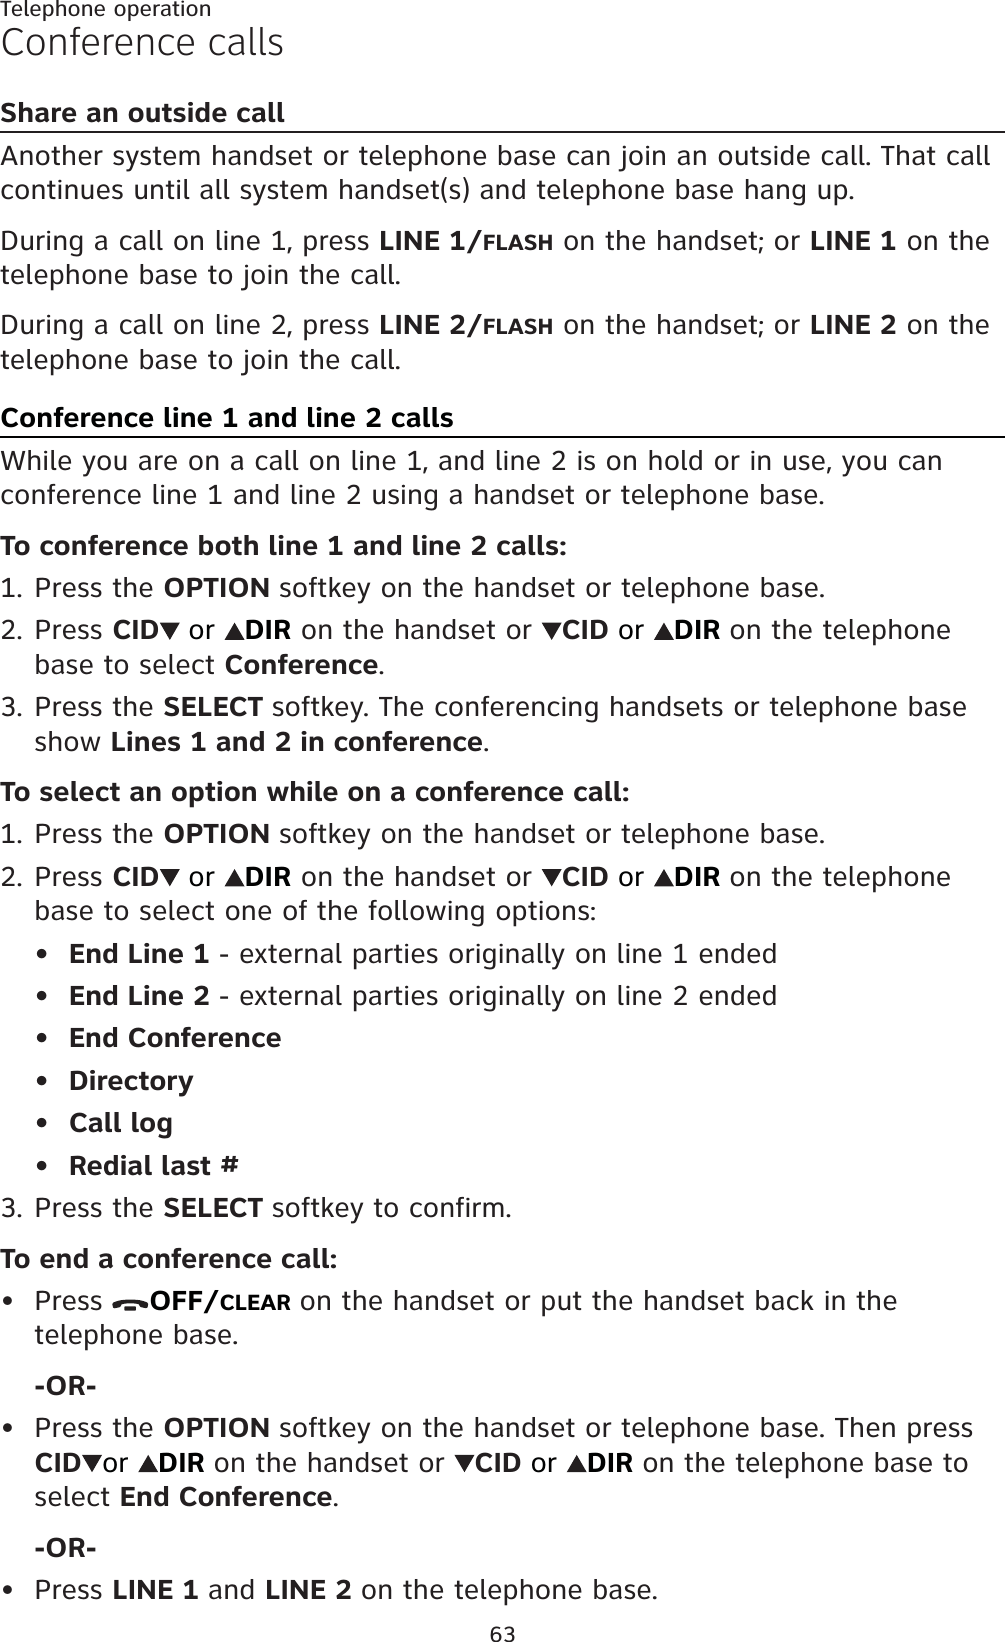 63Telephone operationConference callsShare an outside callAnother system handset or telephone base can join an outside call. That call continues until all system handset(s) and telephone base hang up.During a call on line 1, press LINE 1/FLASH on the handset; or LINE 1 on the telephone base to join the call.During a call on line 2, press LINE 2/FLASH on the handset; or LINE 2 on the telephone base to join the call.Conference line 1 and line 2 callsWhile you are on a call on line 1, and line 2 is on hold or in use, you can conference line 1 and line 2 using a handset or telephone base.To conference both line 1 and line 2 calls:Press the OPTION softkey on the handset or telephone base.Press CID or DIR on the handset or  CID or DIR on the telephone base to select Conference.Press the SELECT softkey. The conferencing handsets or telephone base show Lines 1 and 2 in conference.To select an option while on a conference call:Press the OPTION softkey on the handset or telephone base.Press CID or DIR on the handset or  CID or DIR on the telephone base to select one of the following options:End Line 1 - external parties originally on line 1 endedEnd Line 2 - external parties originally on line 2 endedEnd ConferenceDirectoryCall logRedial last #Press the SELECT softkey to confirm.To end a conference call:Press  OFF/CLEAR on the handset or put the handset back in the telephone base.-OR-Press the OPTION softkey on the handset or telephone base. Then press  CID or DIR on the handset or  CID or DIR on the telephone base to select End Conference.-OR-Press LINE 1 and LINE 2 on the telephone base.1.2.3.1.2.••••••3.•••